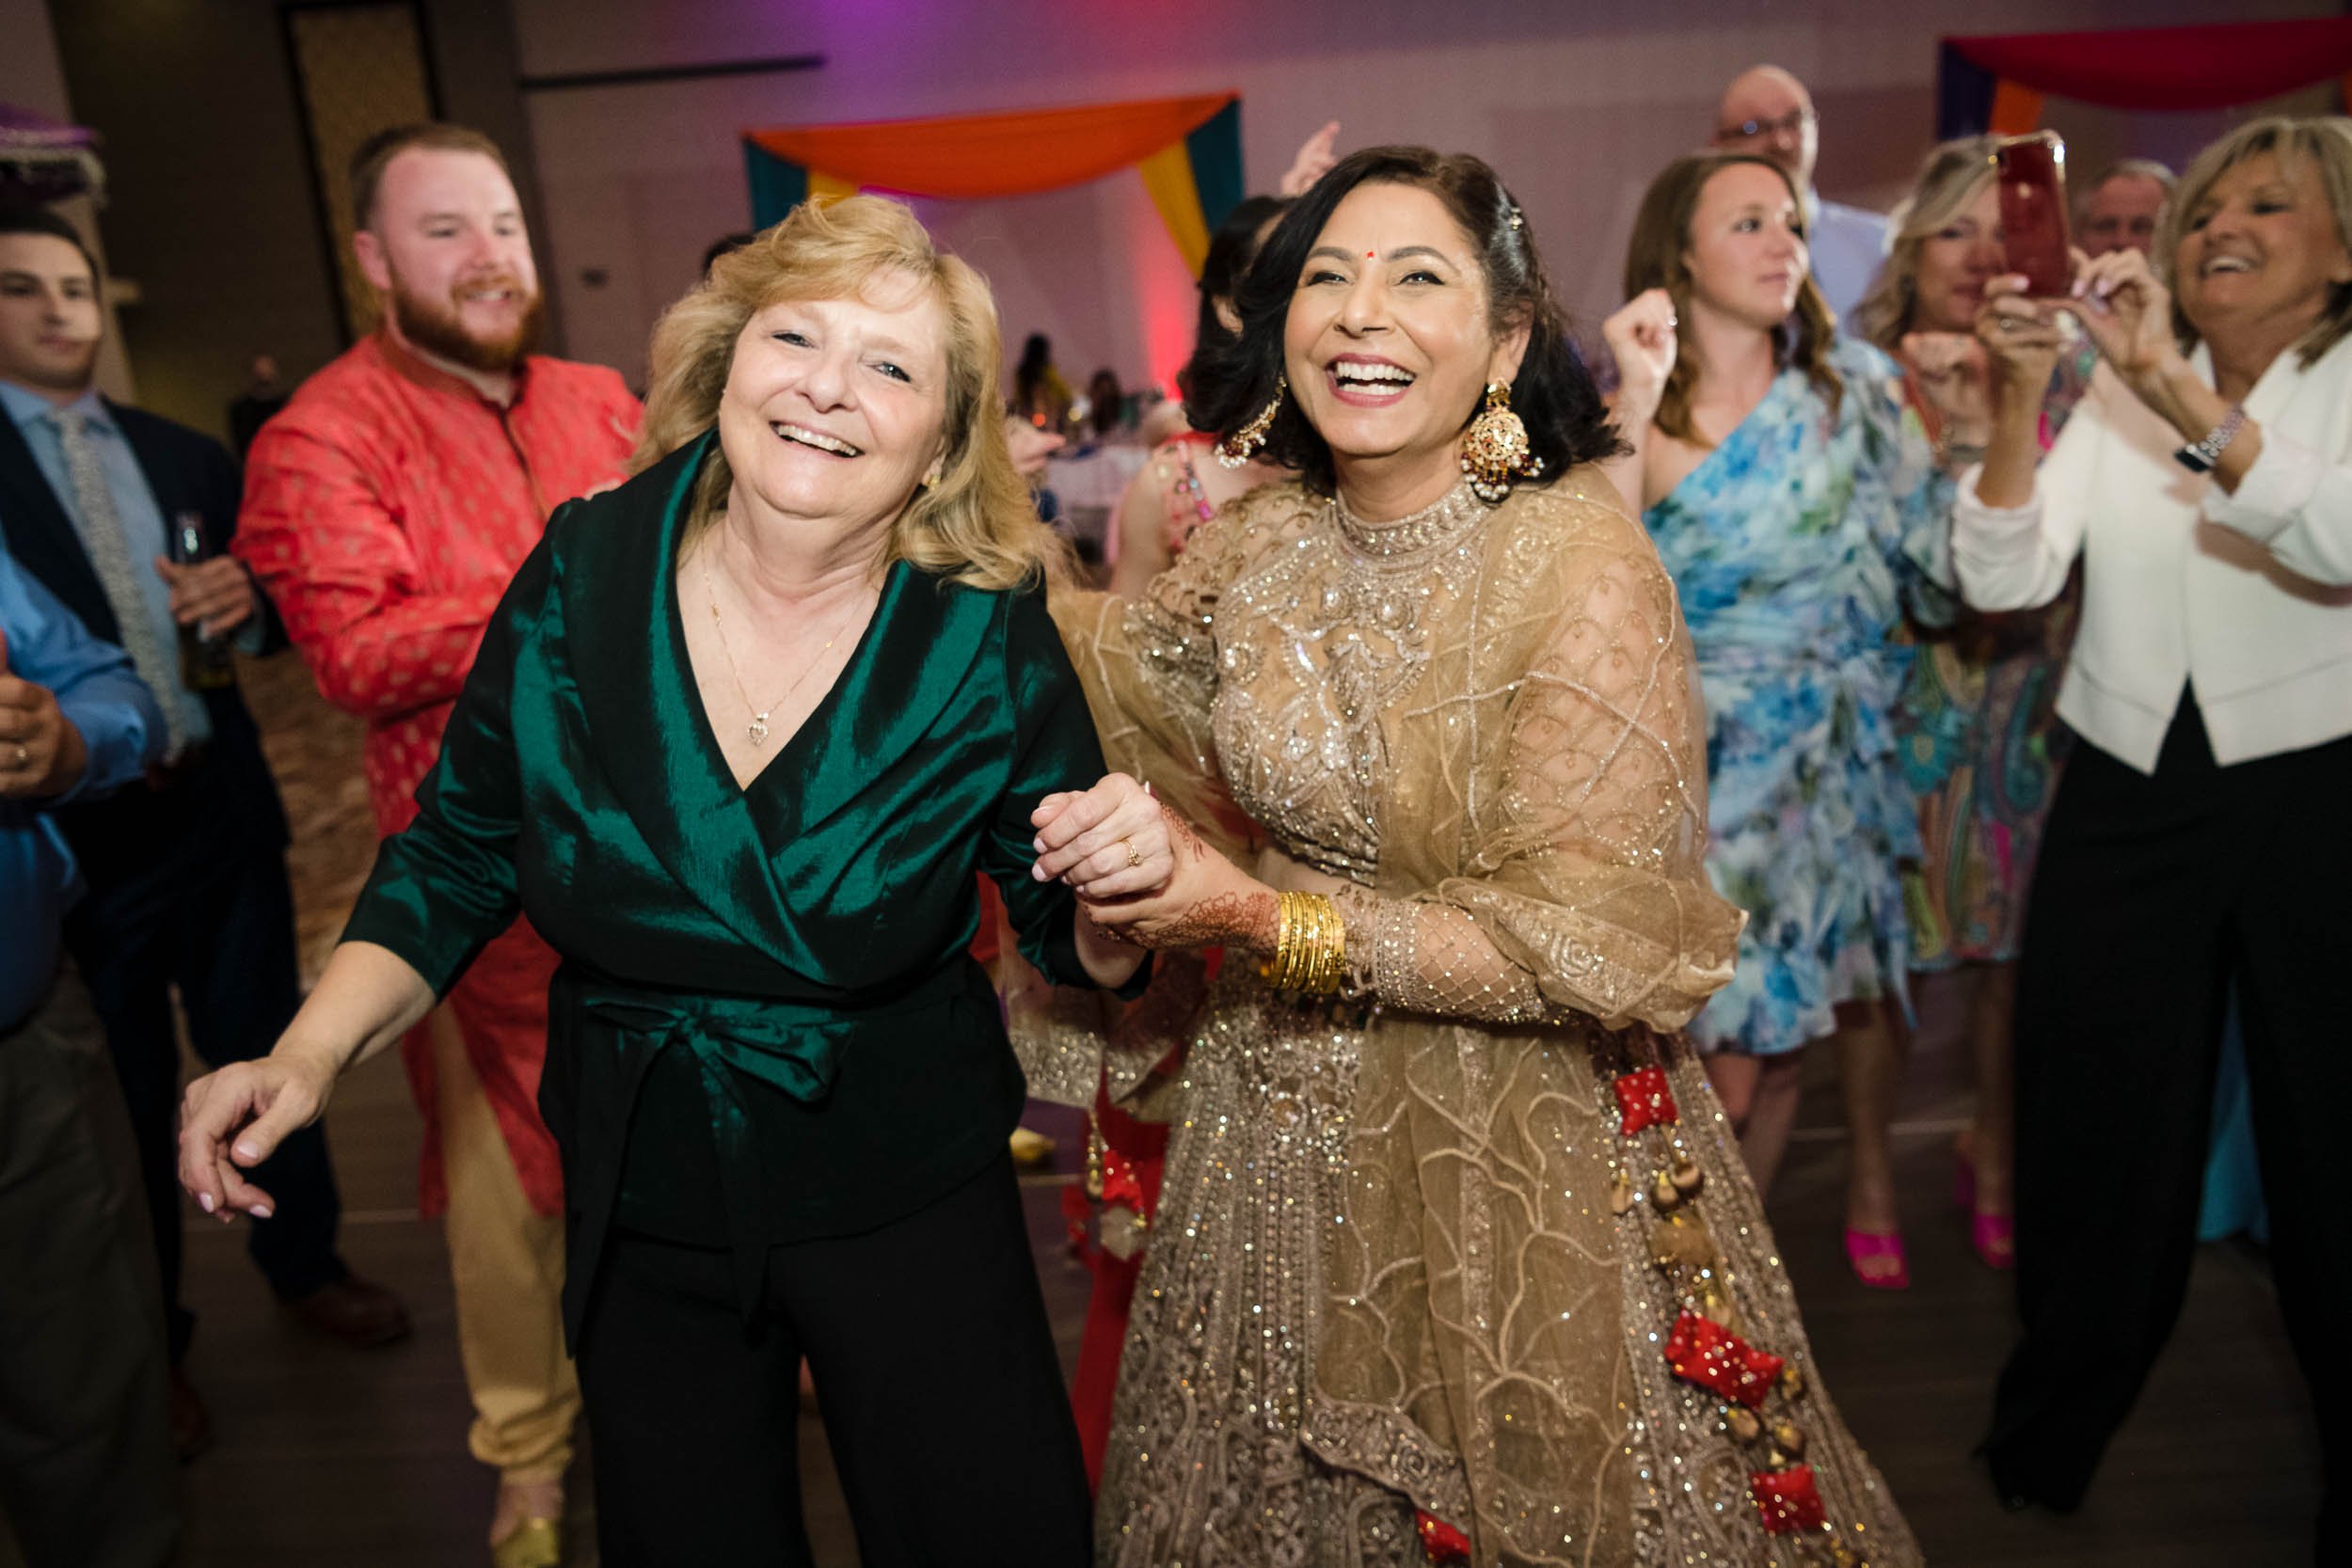 Indian Wedding Photographers Chicago | Renaissance Schaumburg | J. Brown Photography | moms of the couple on the dance floor.